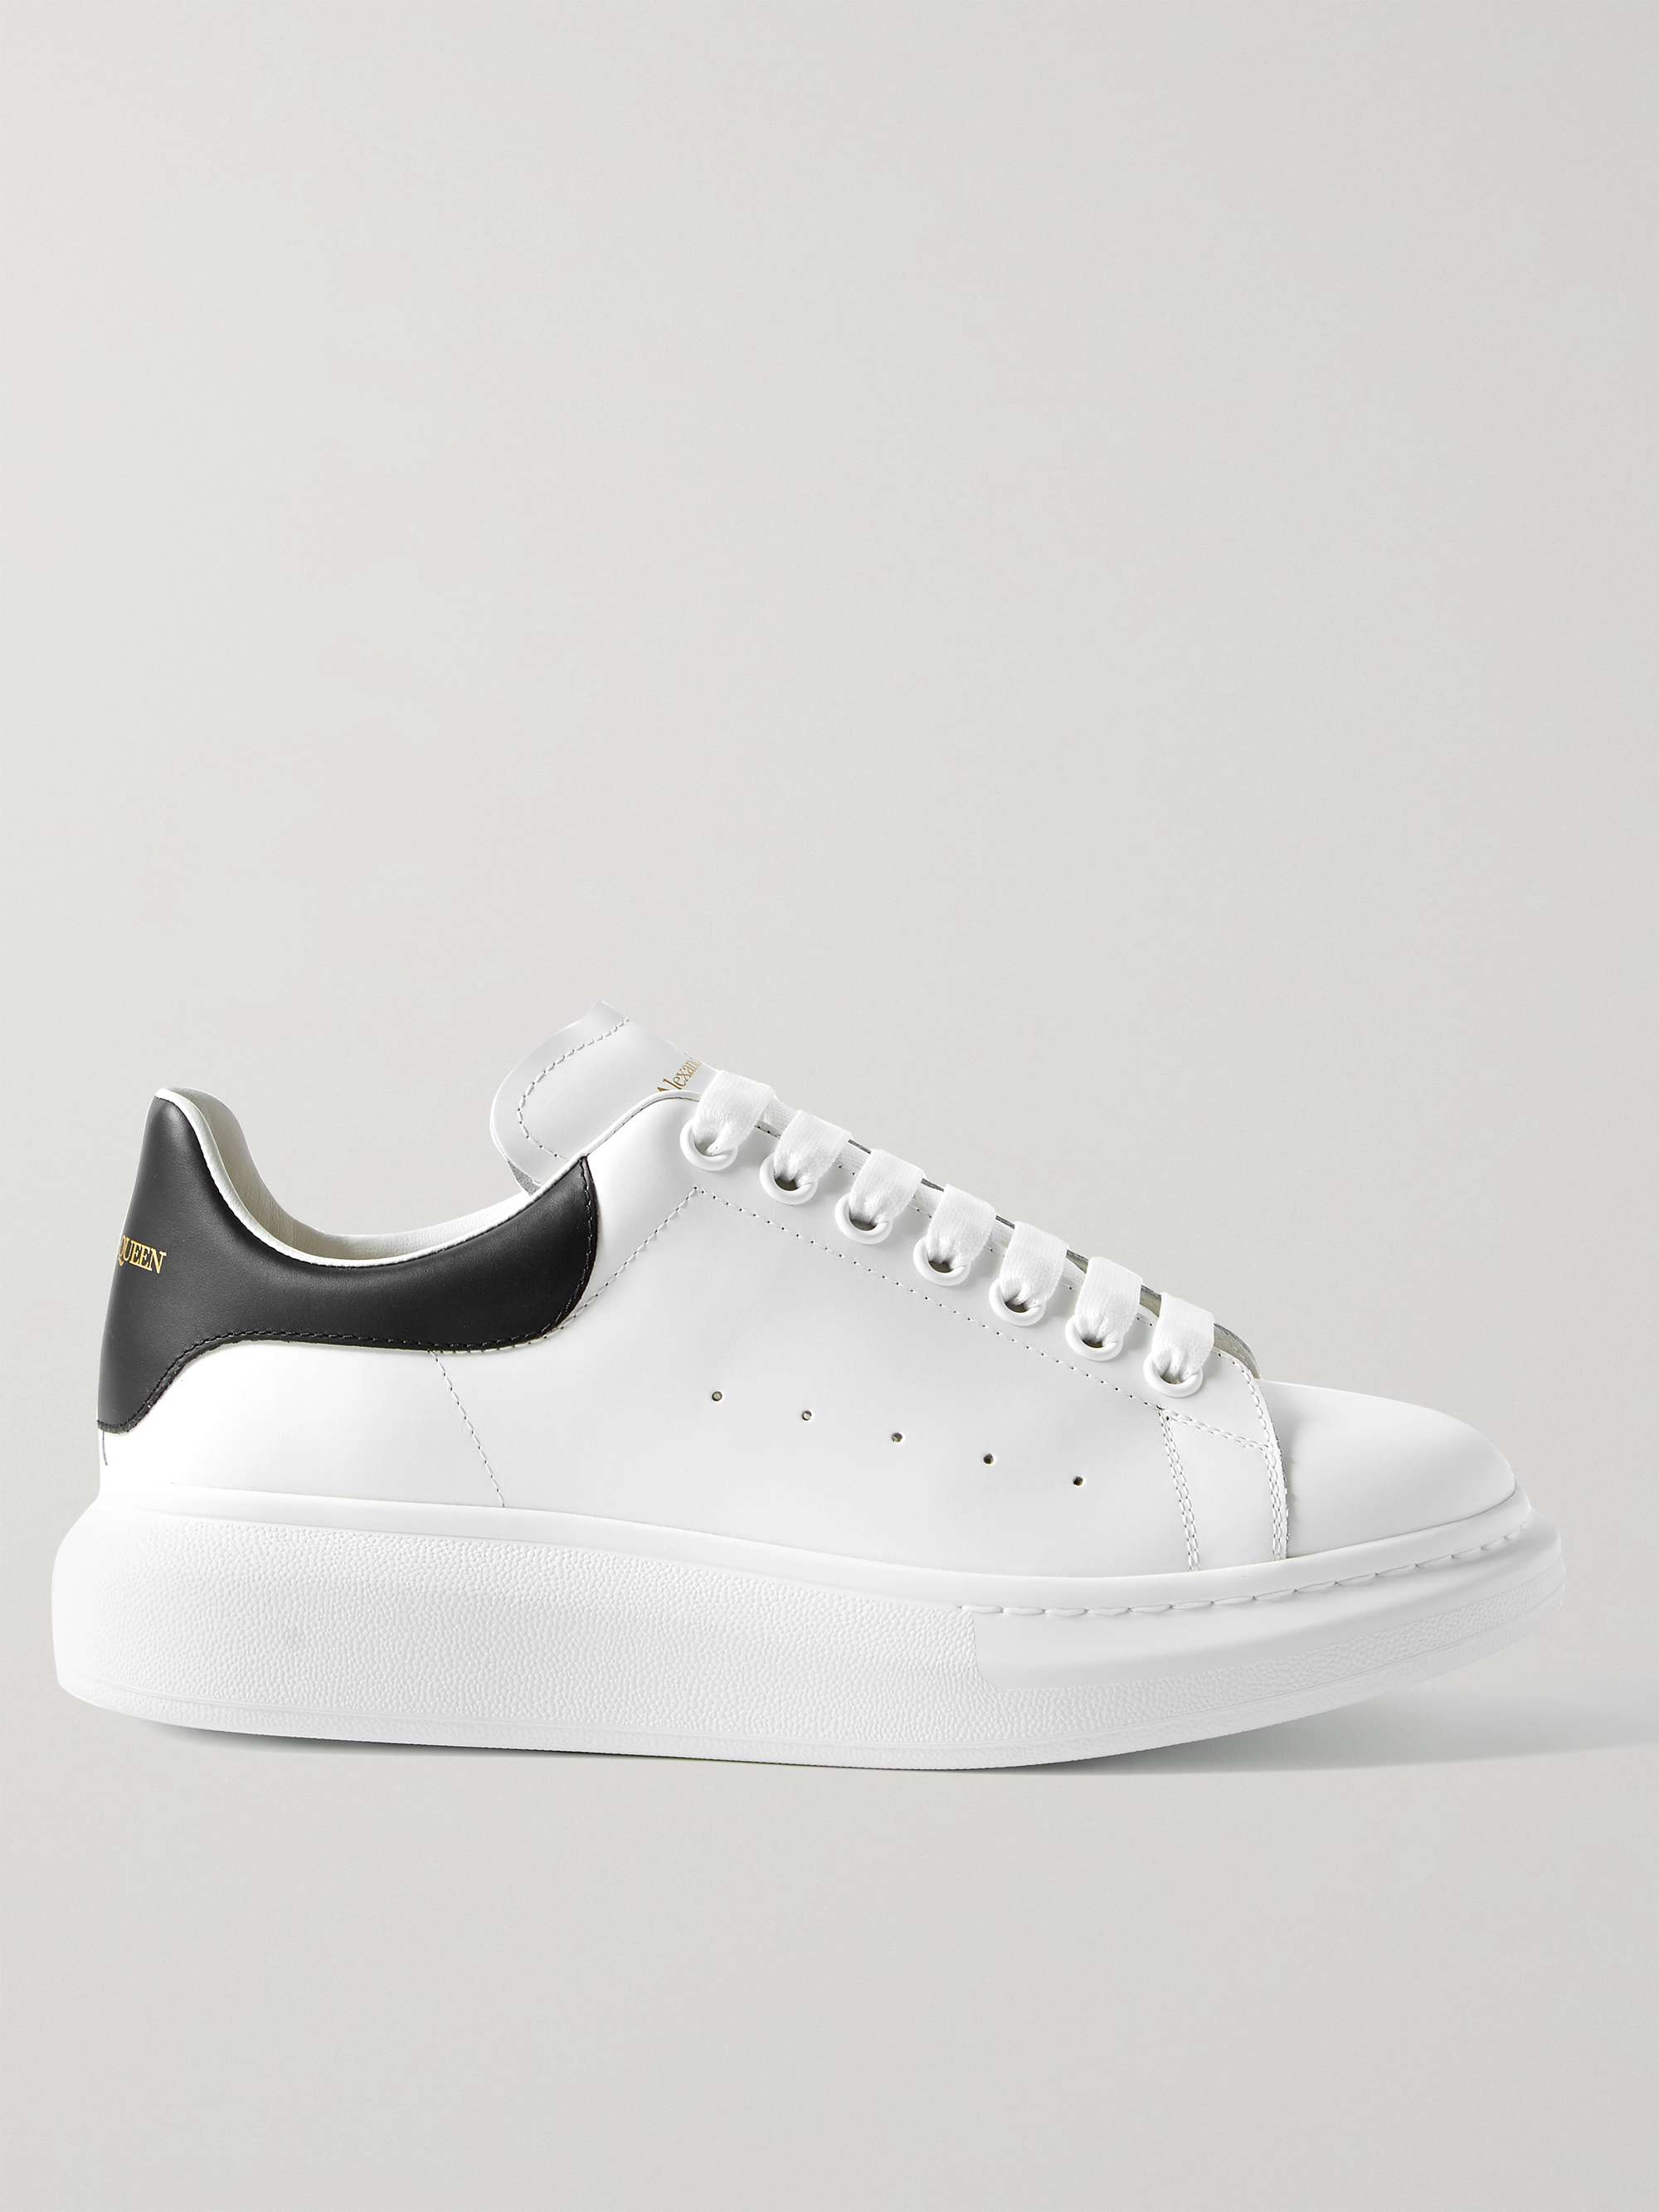 Diligence bandage light's White Exaggerated-Sole Leather Sneakers | ALEXANDER MCQUEEN | MR PORTER